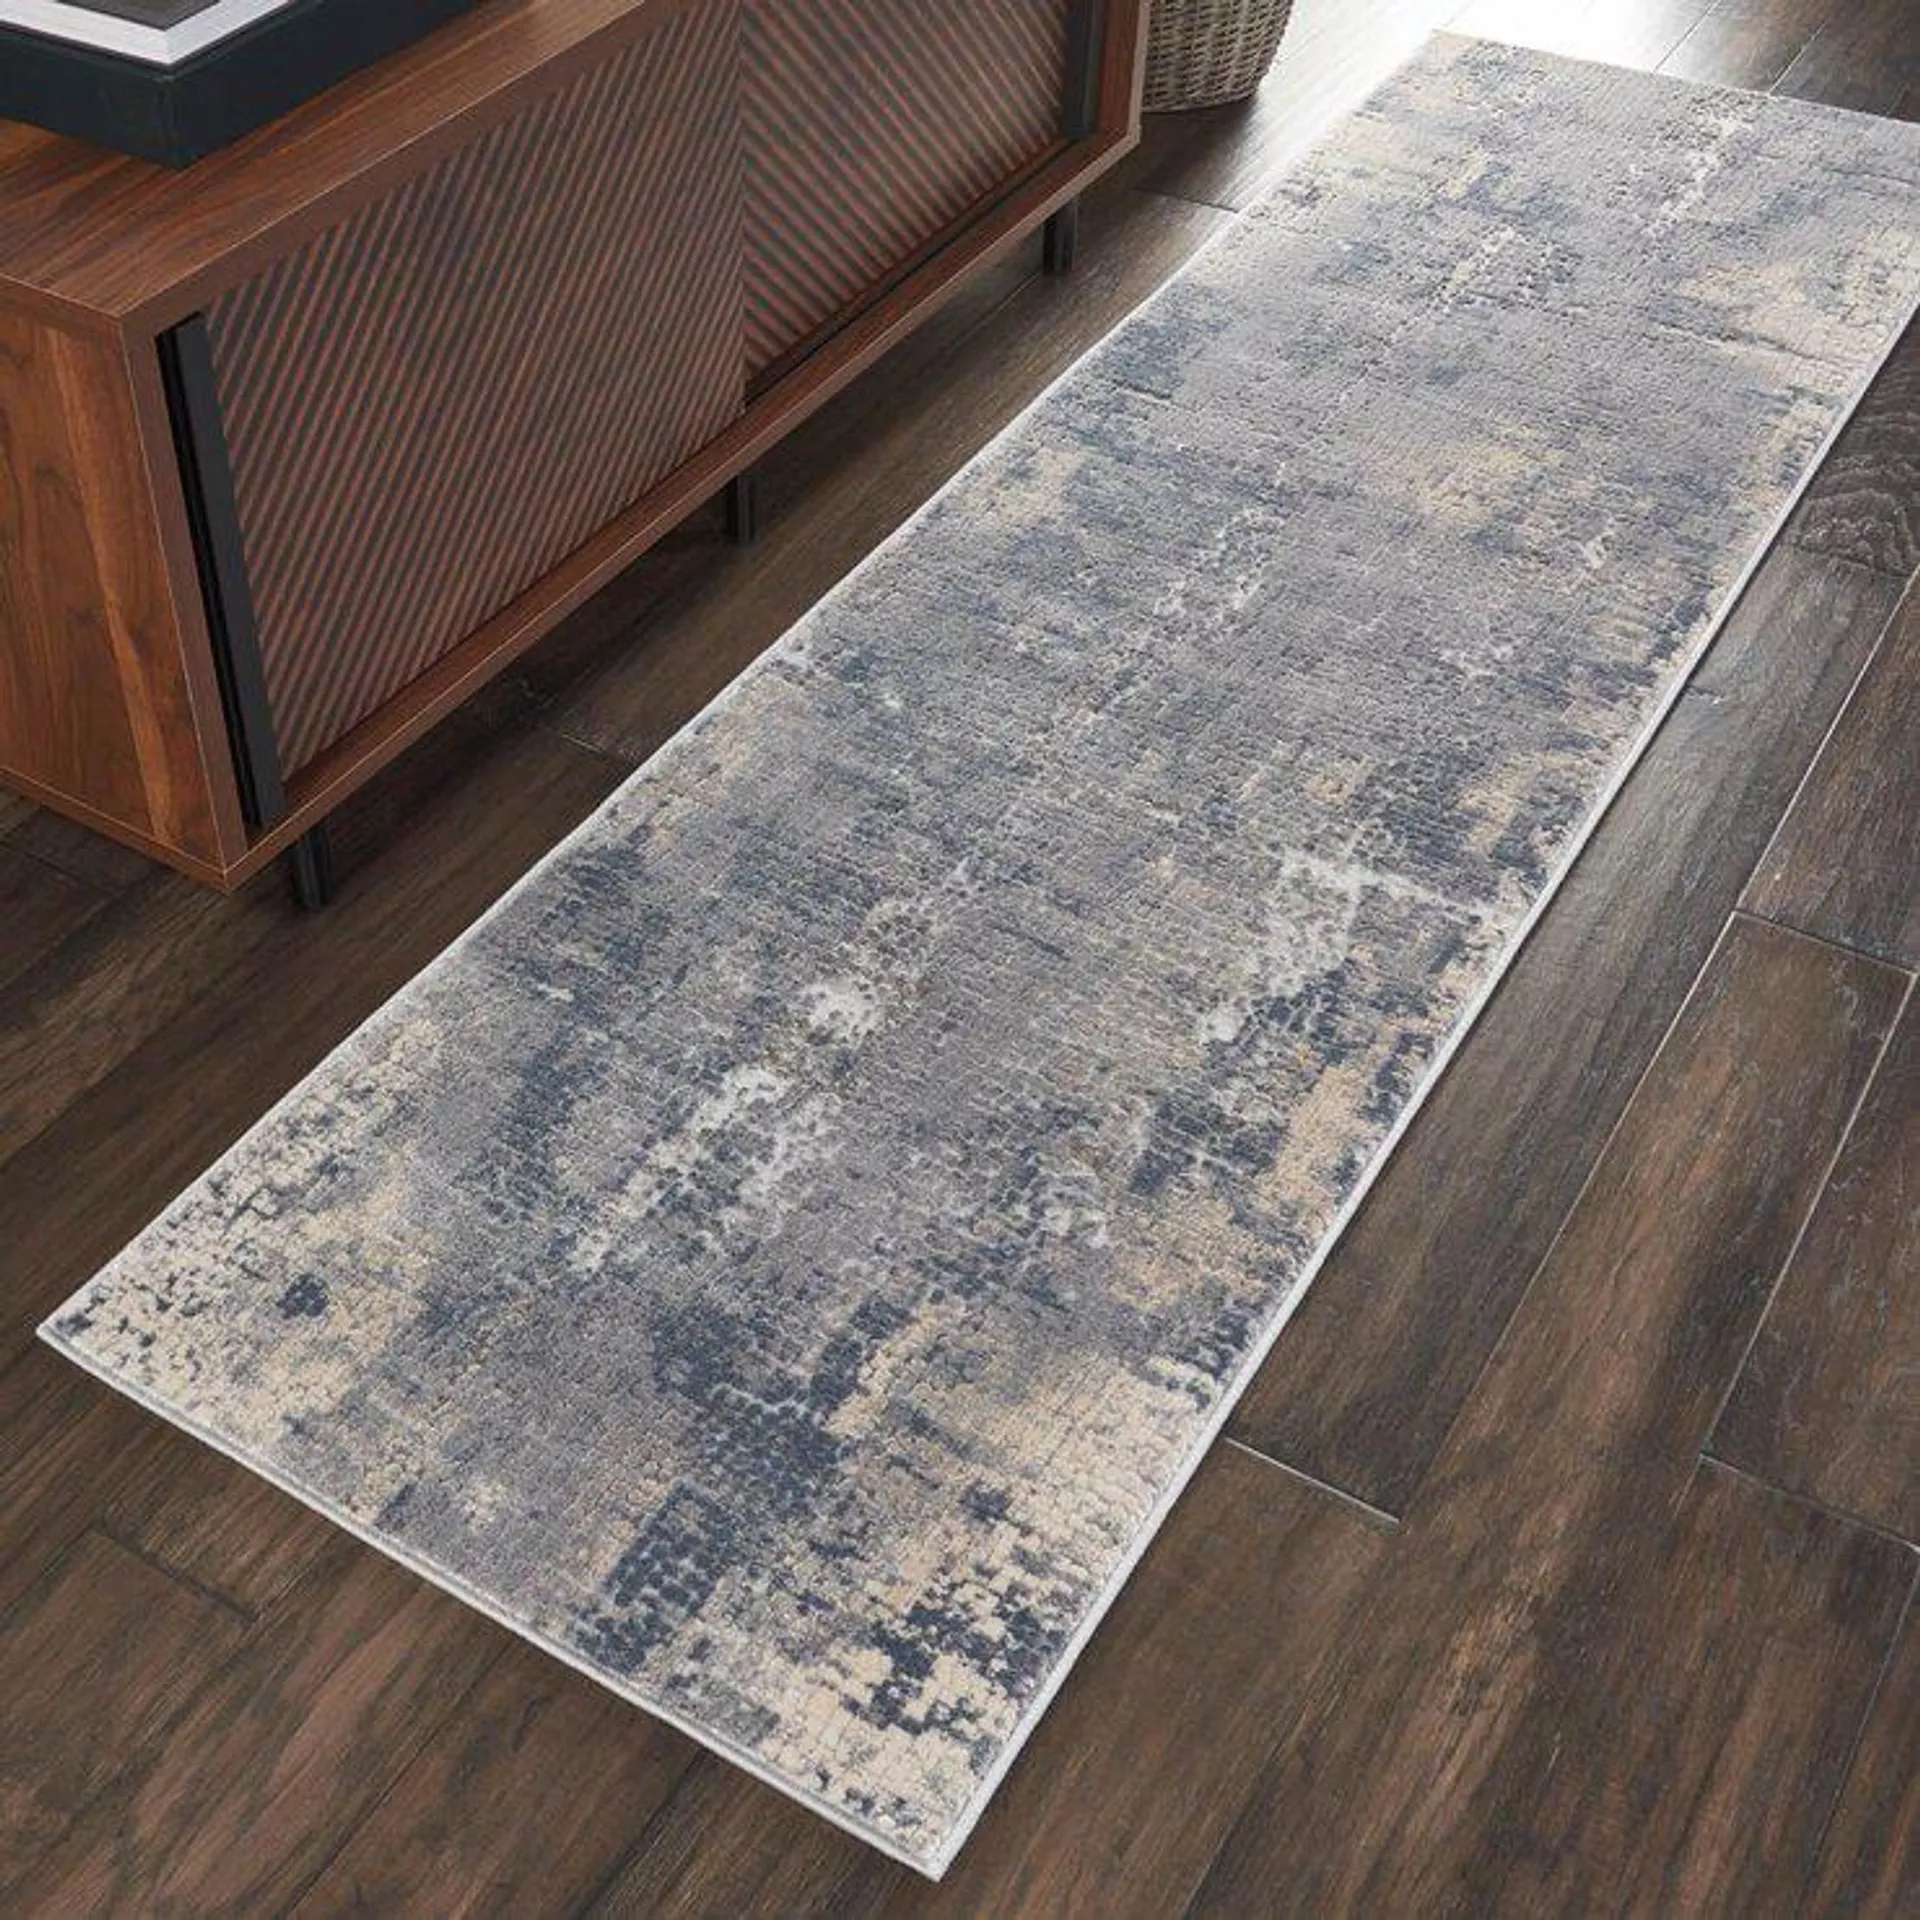 Rustic Textures Faded Blue Runner, 66 x 236 cm